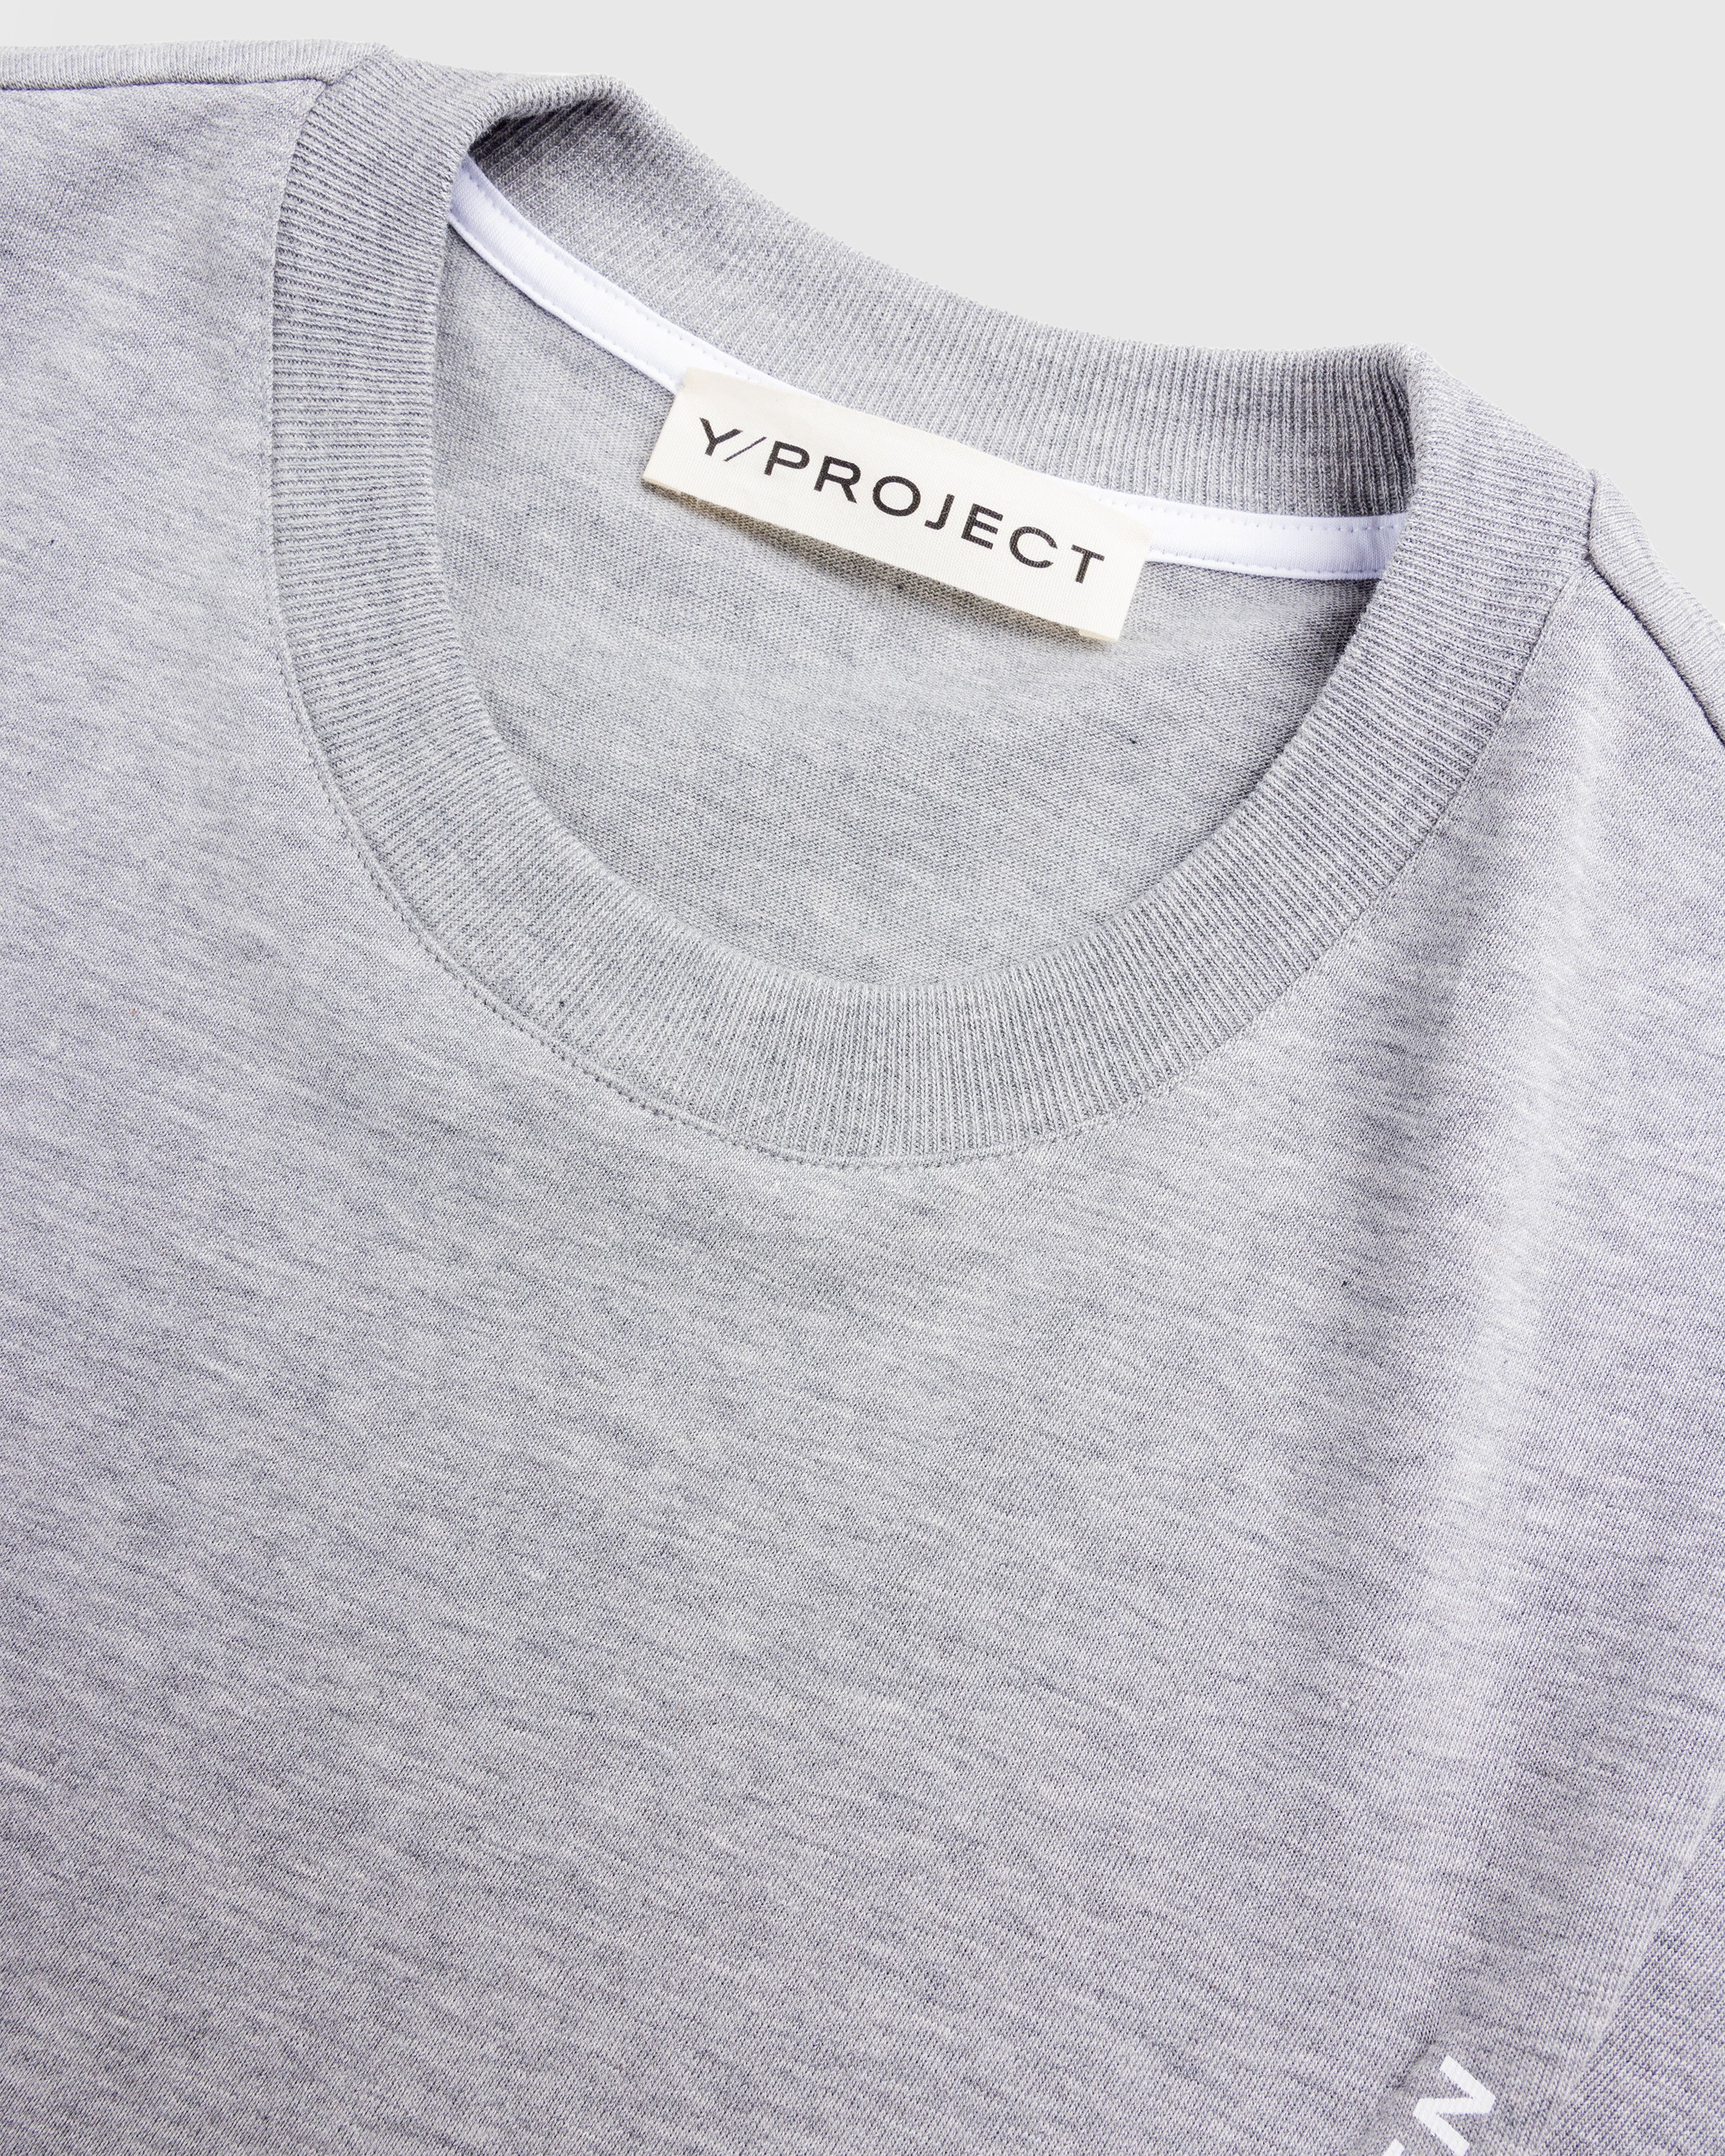 Y/Project - Evergreen Pinched Logo T-Shirt Evergreen Grey Melange - Clothing - Grey - Image 6